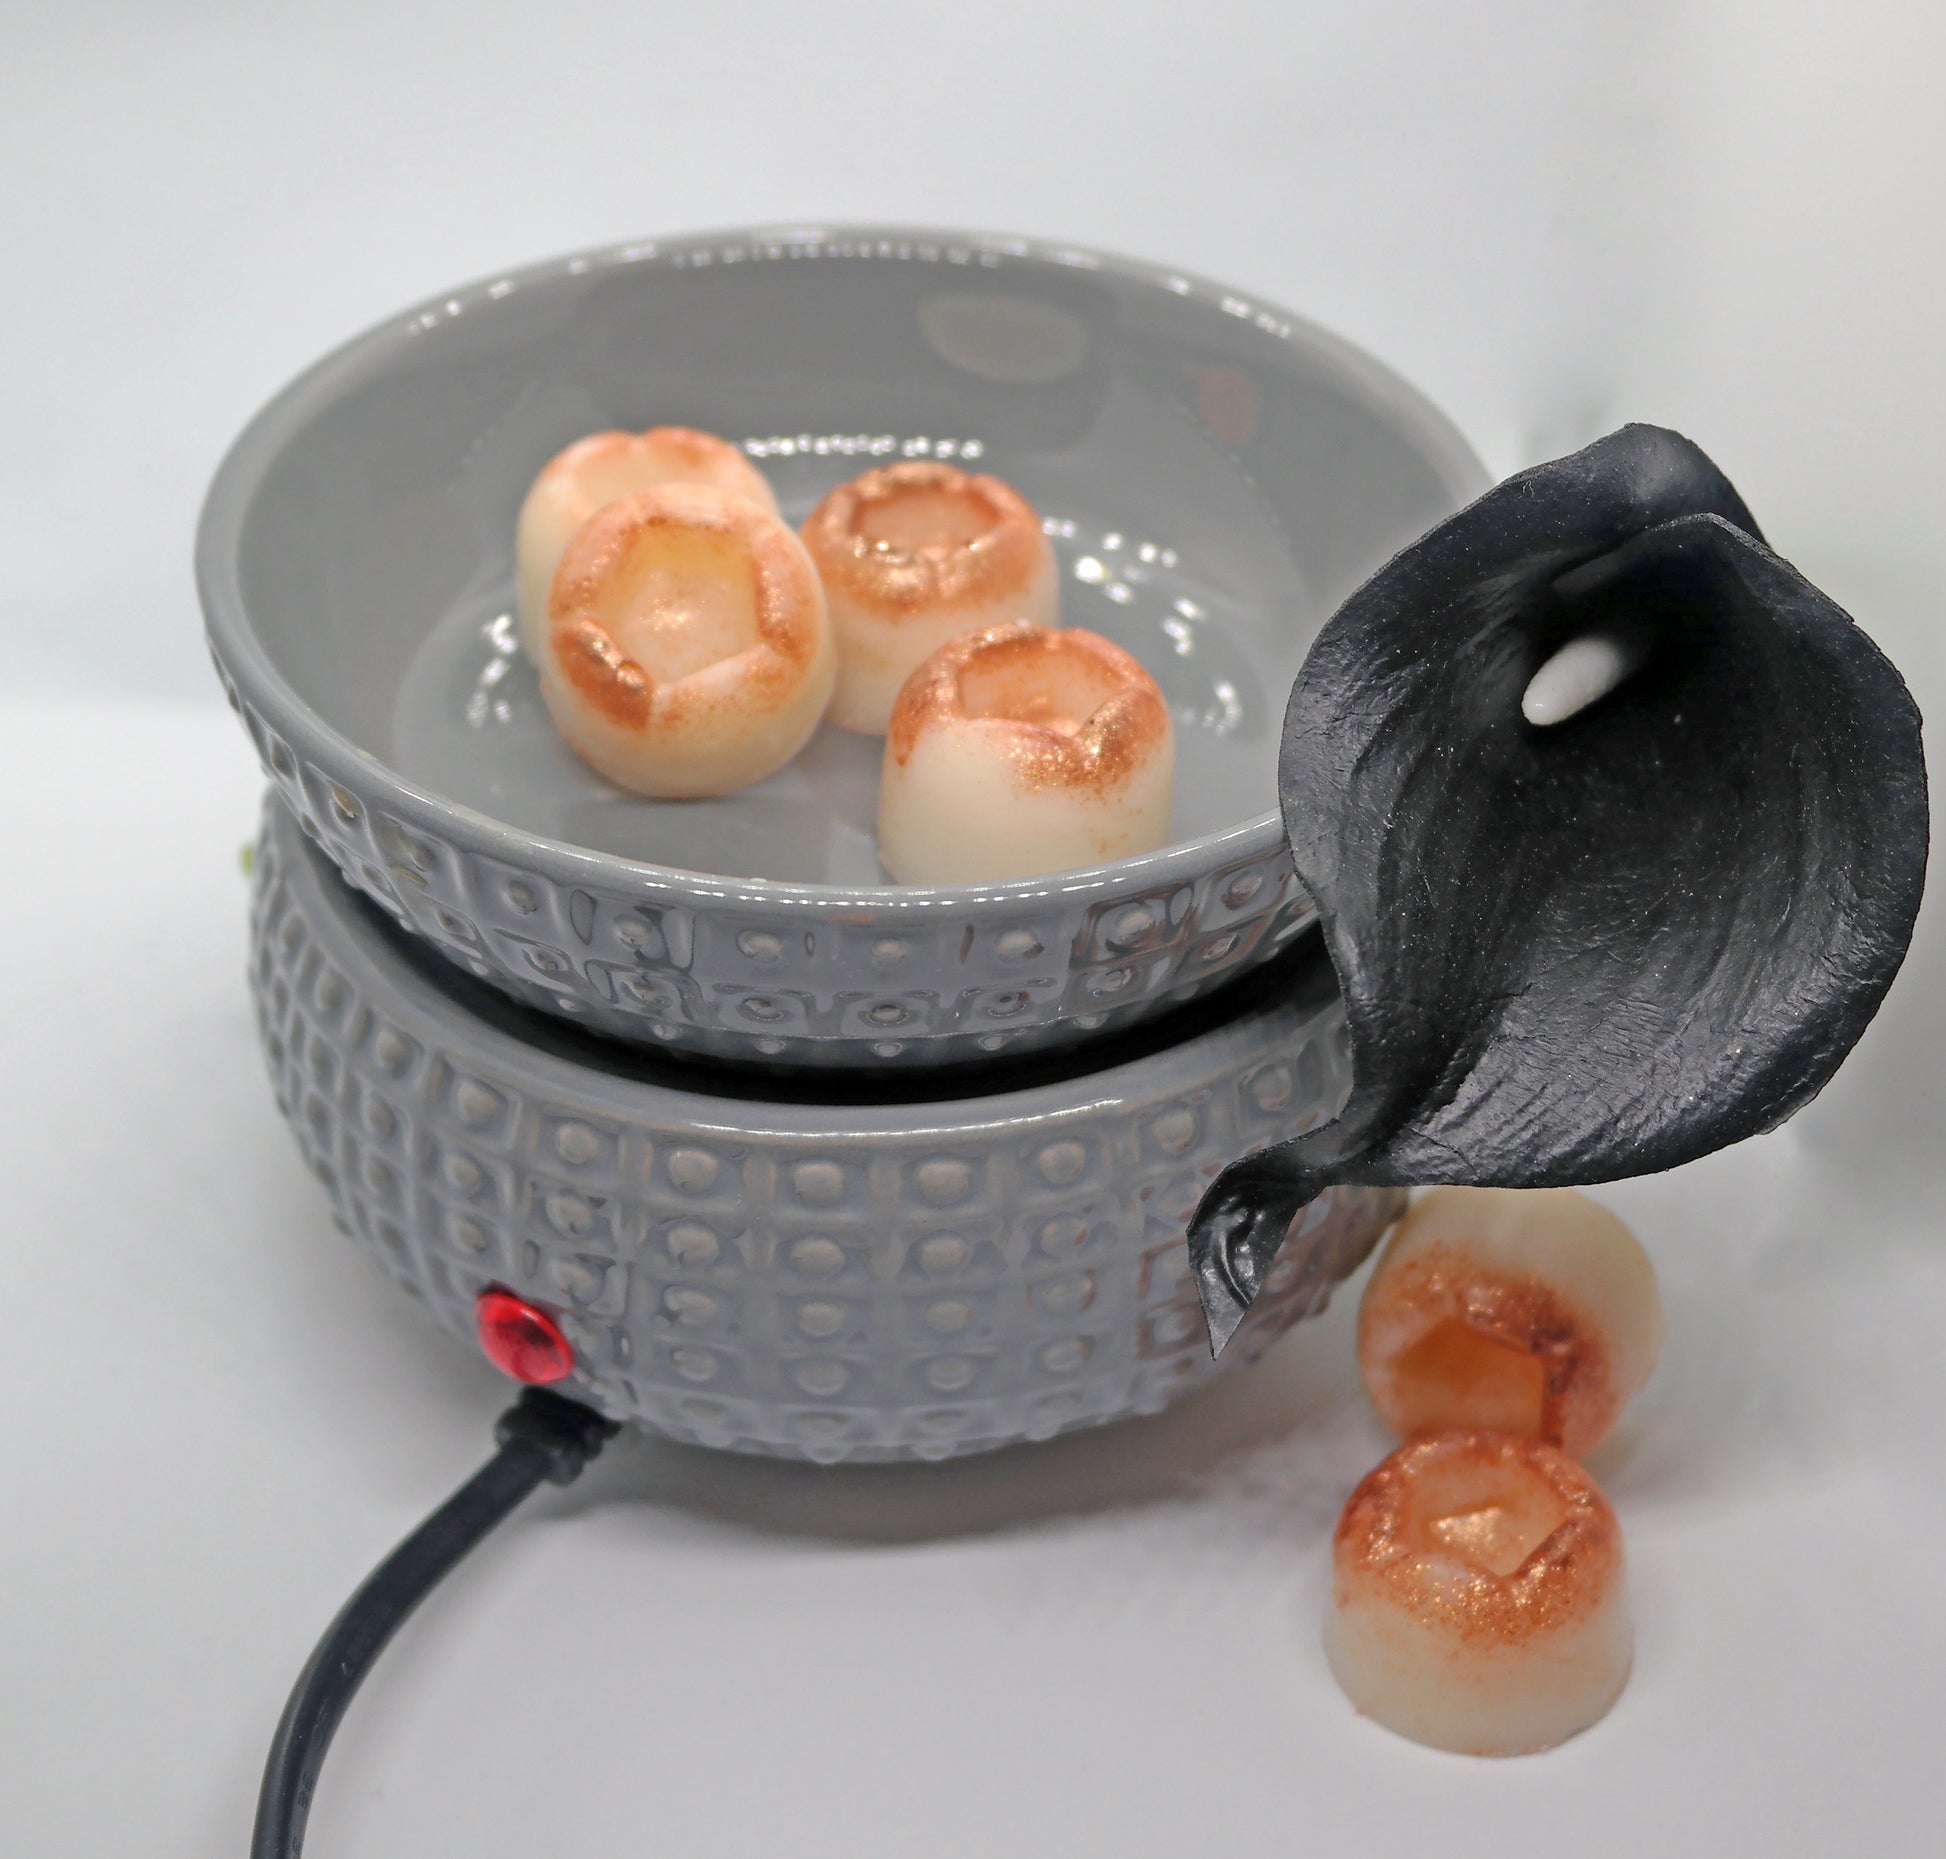 Dimpled Ceramic Grey Electric Wax Melter|Burner & Candle Warmer